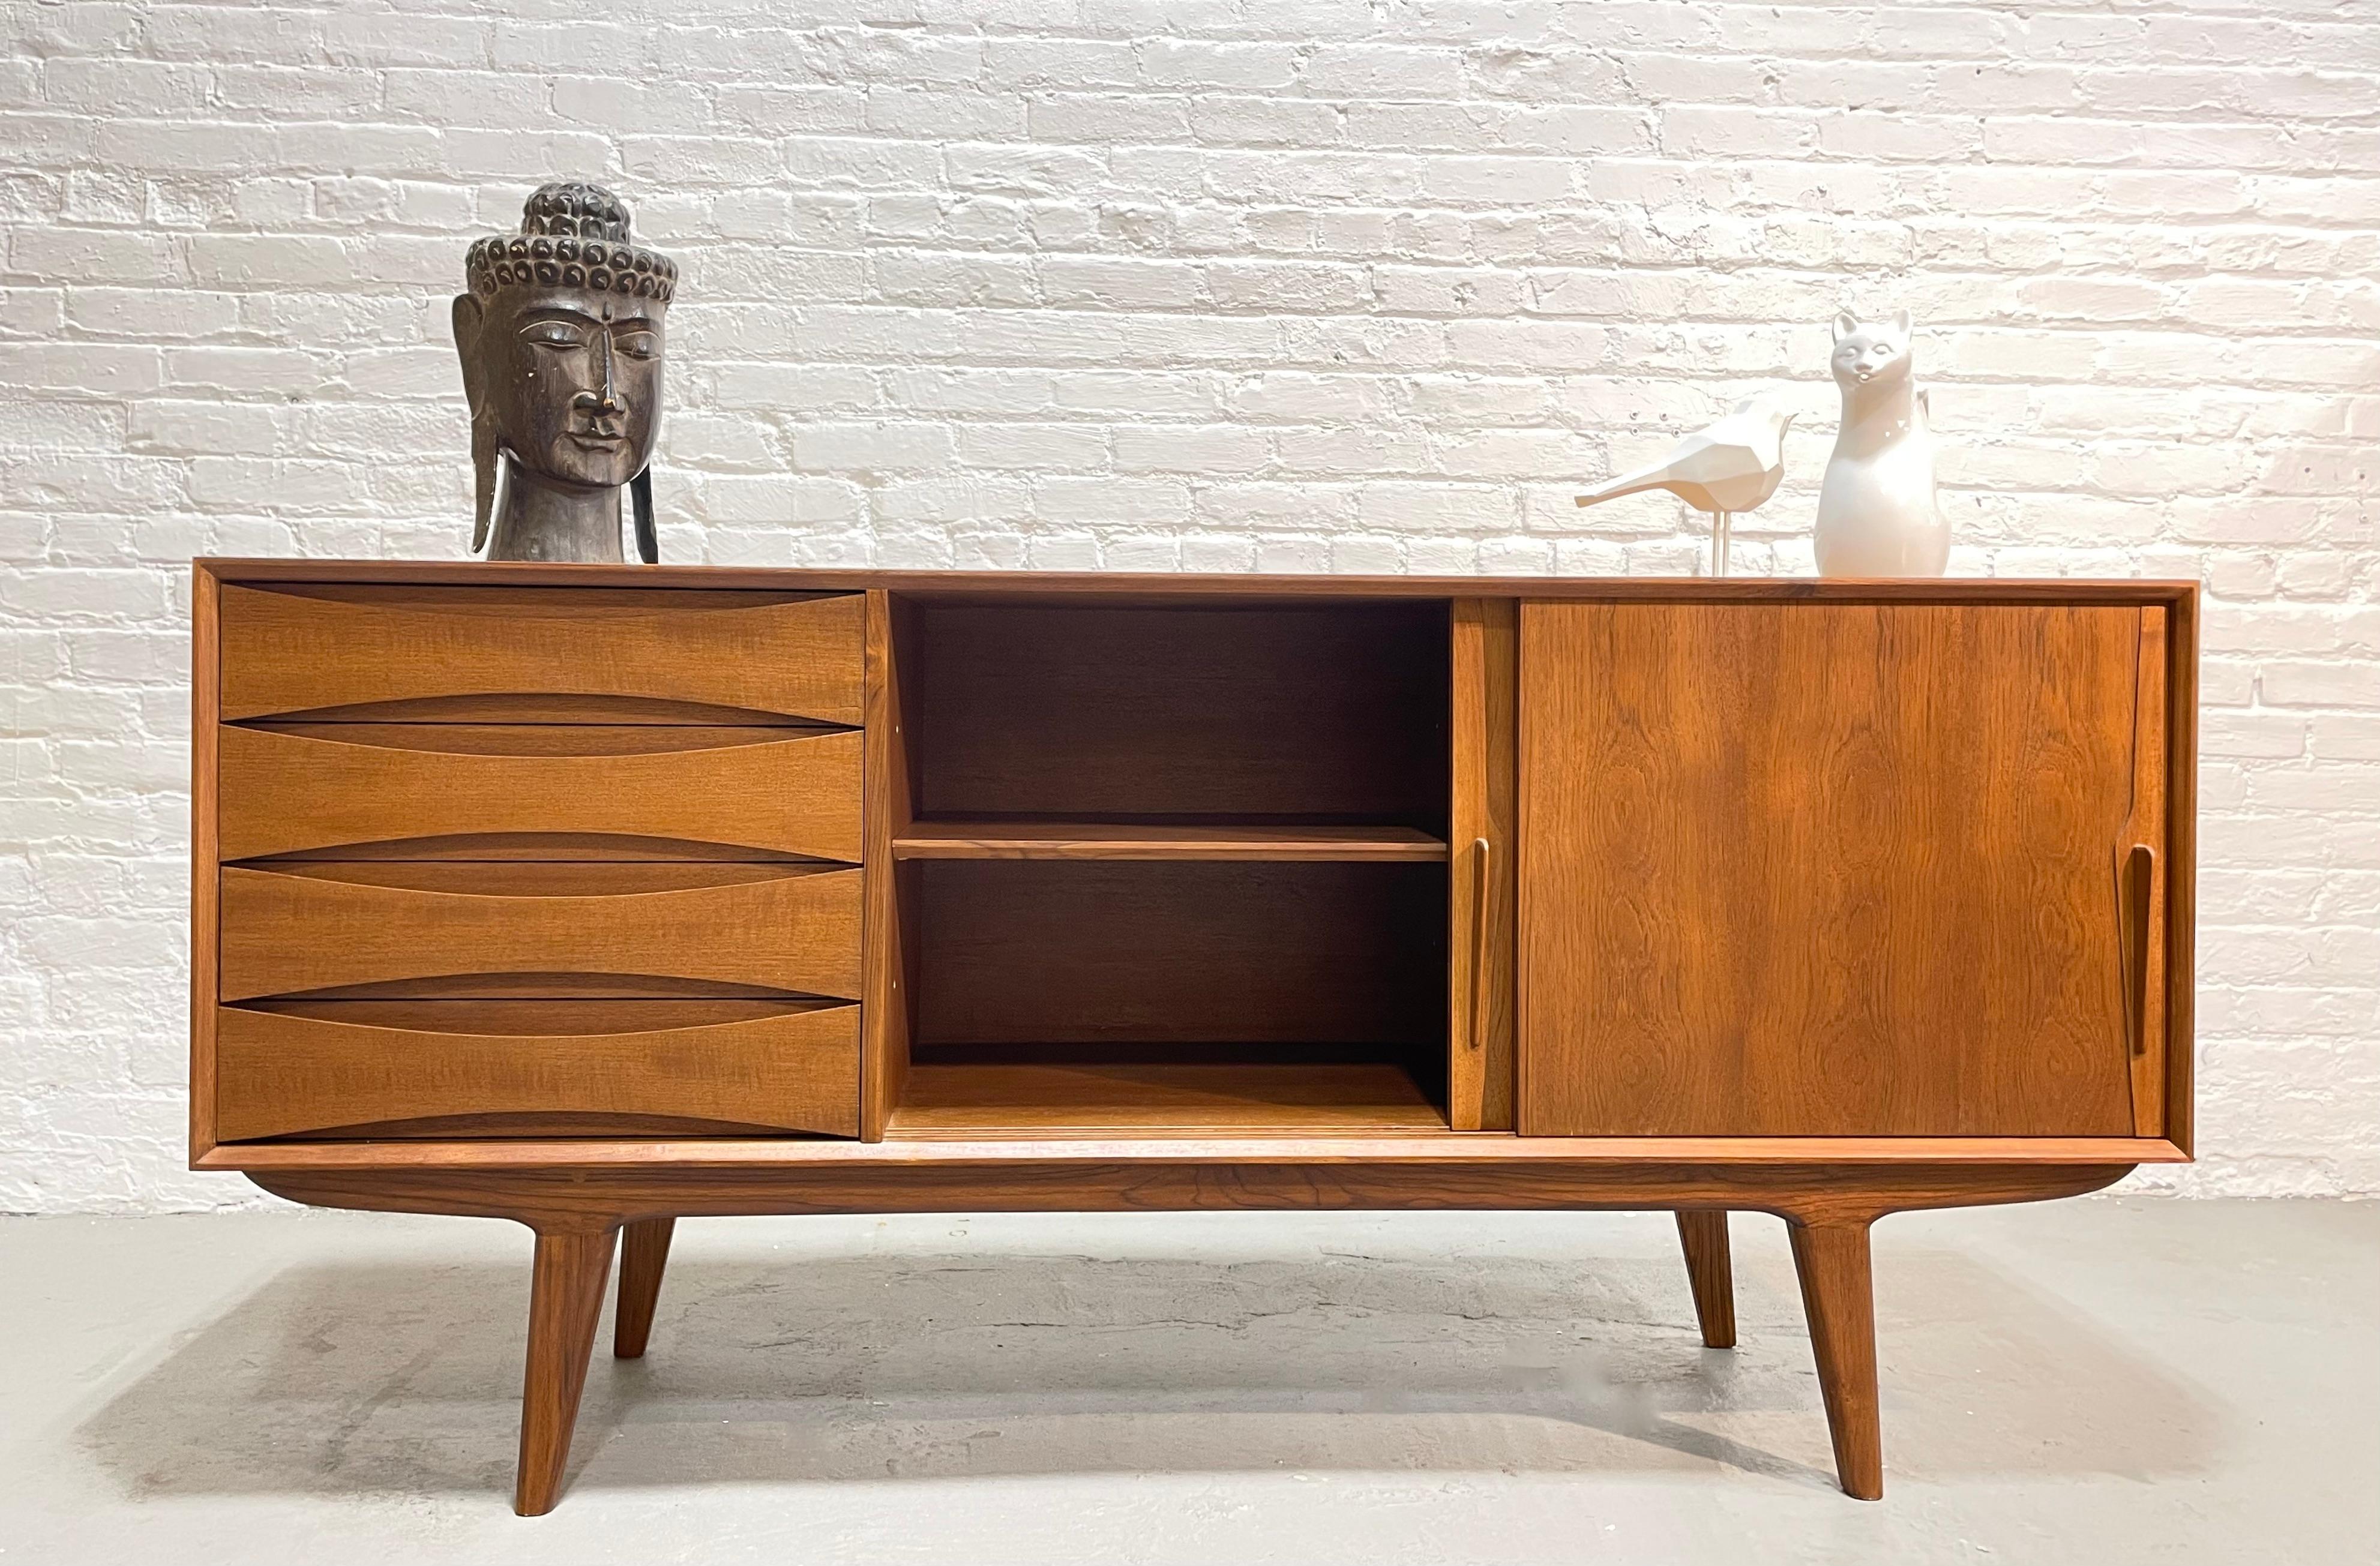  Handsome Mid Century MODERN styled SIDEBOARD / CREDENZA media stand For Sale 1